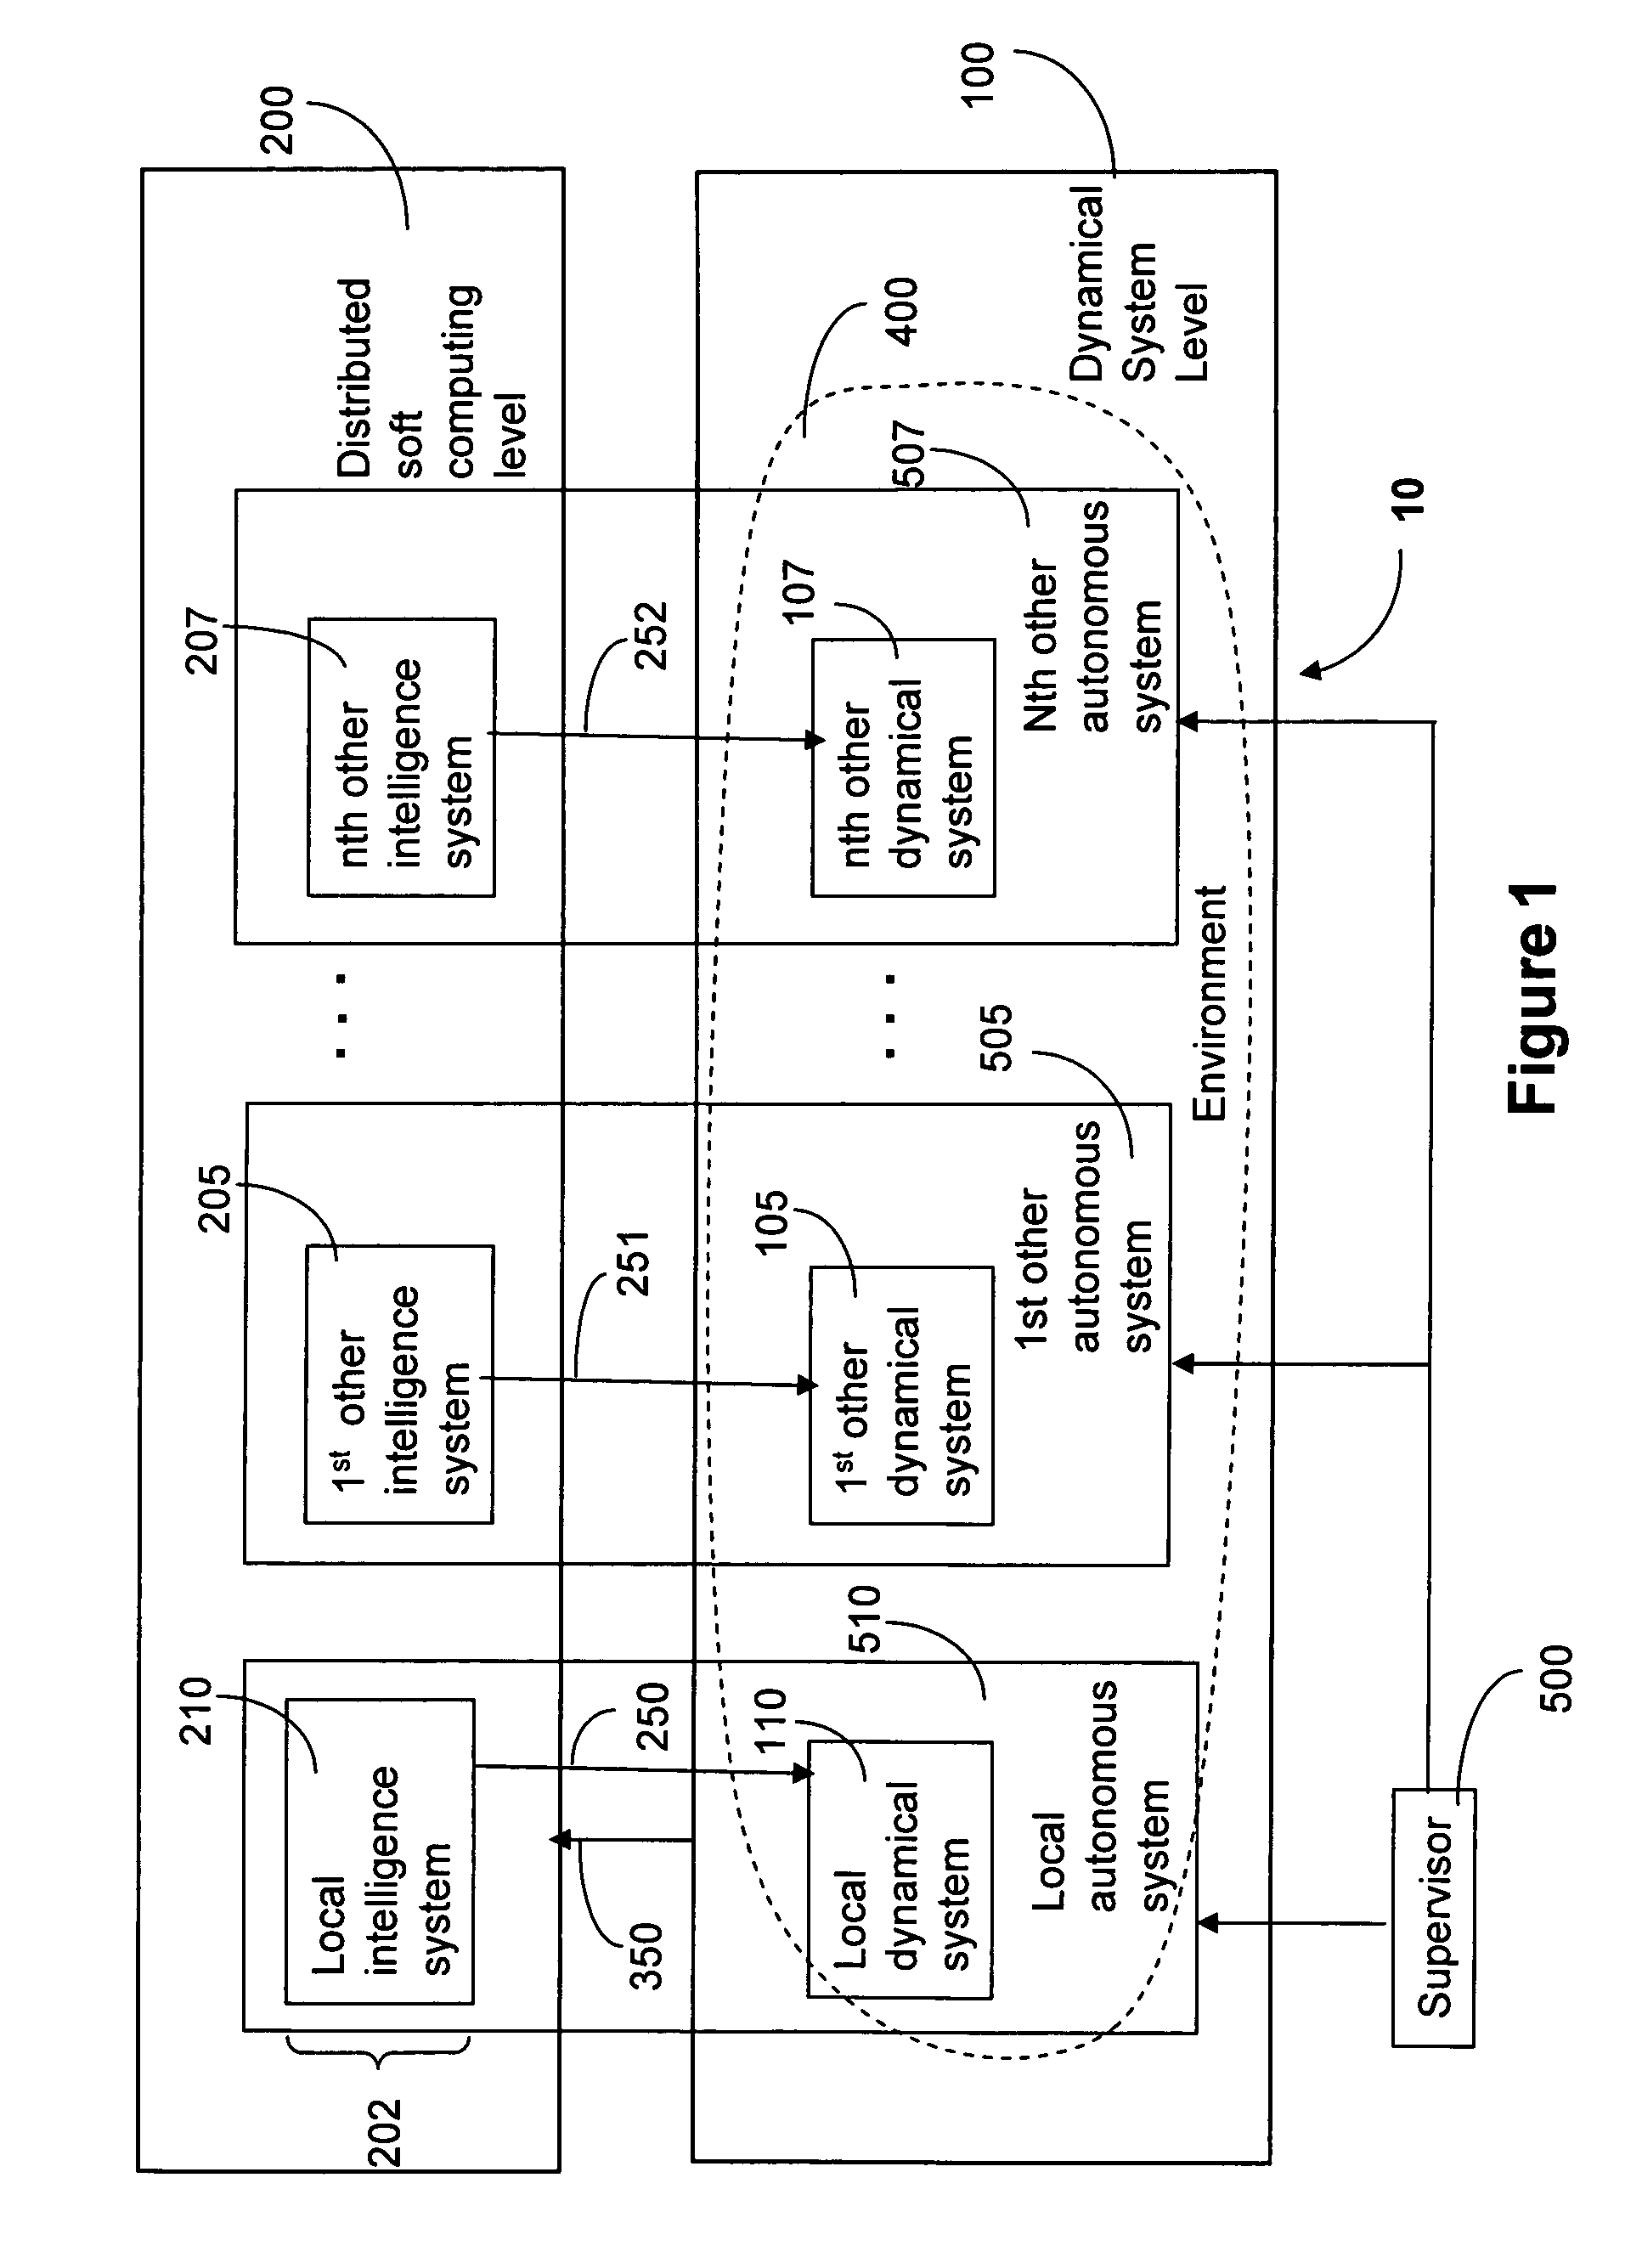 Method for soft-computing supervision of dynamical processes with multiple control objectives